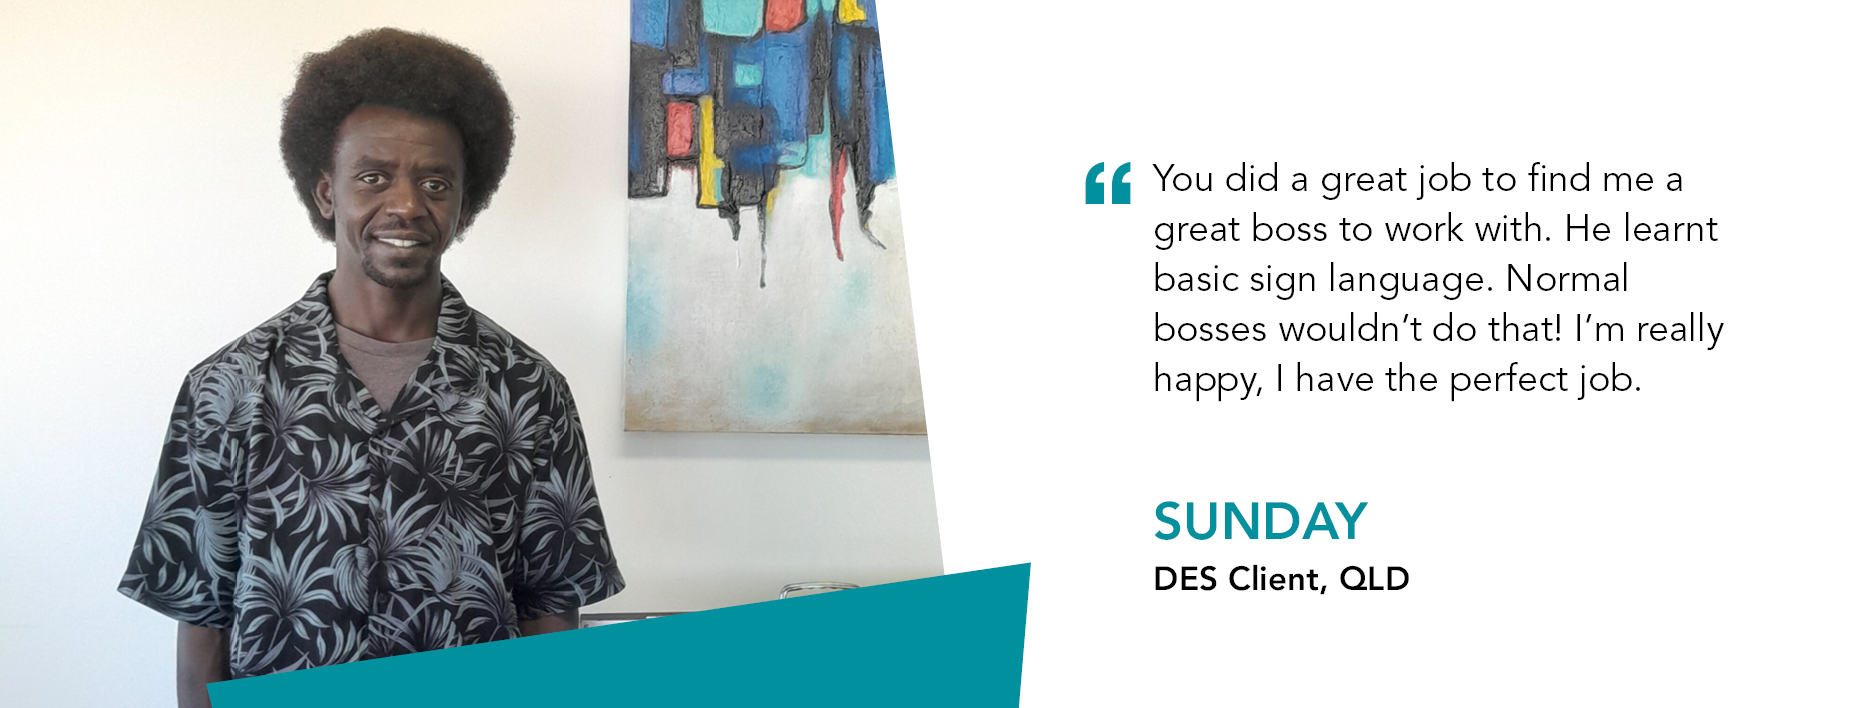 Quote reads "You did a great job to find me a great boss to work with. He learnt basic sign language. Normal bosses wouldn't do that! I'm really happy, I have the perfect job,” - Sunday, DES Client, QLD.